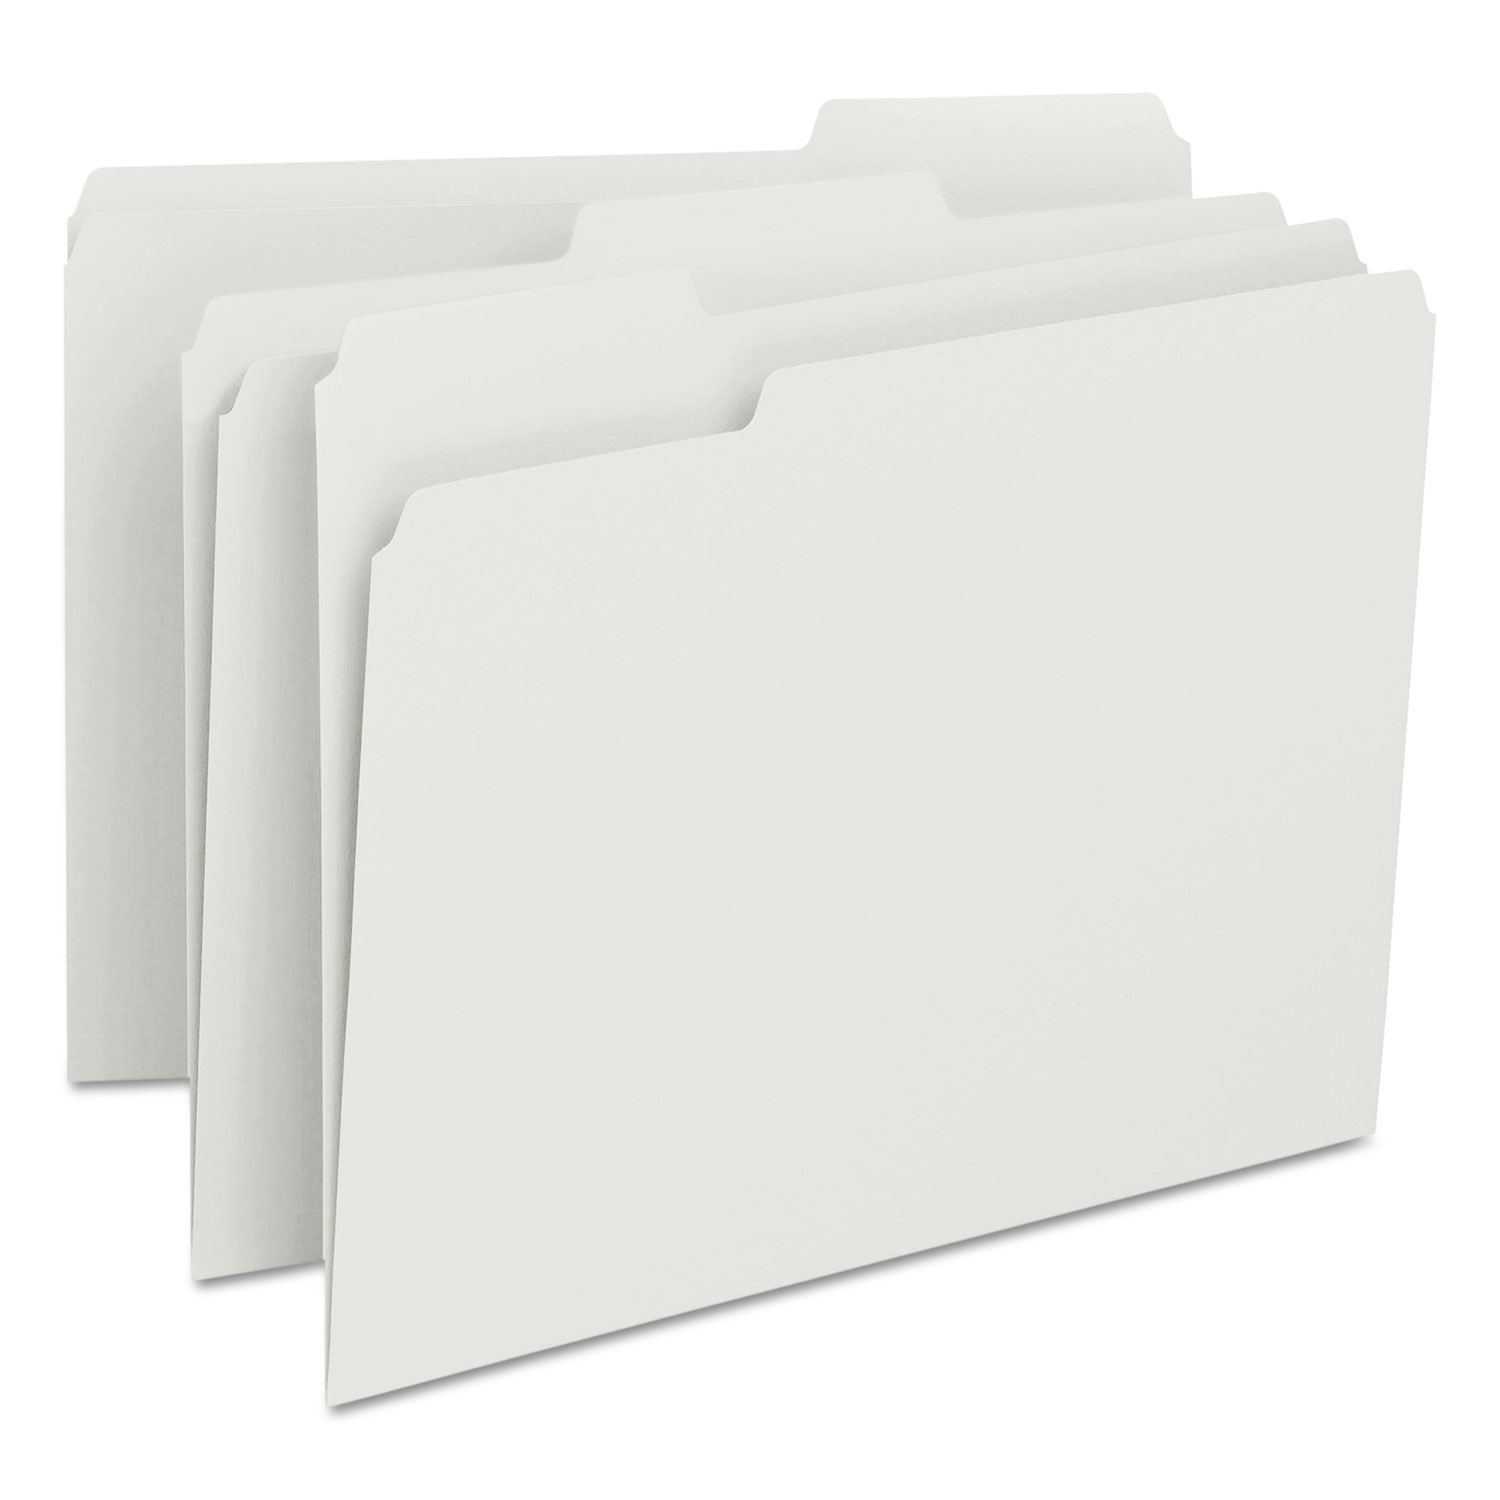  Smead 12843 Colored File Folders, 1/3-Cut Tabs, Letter Size, White, 100/Box (SMD12843) 